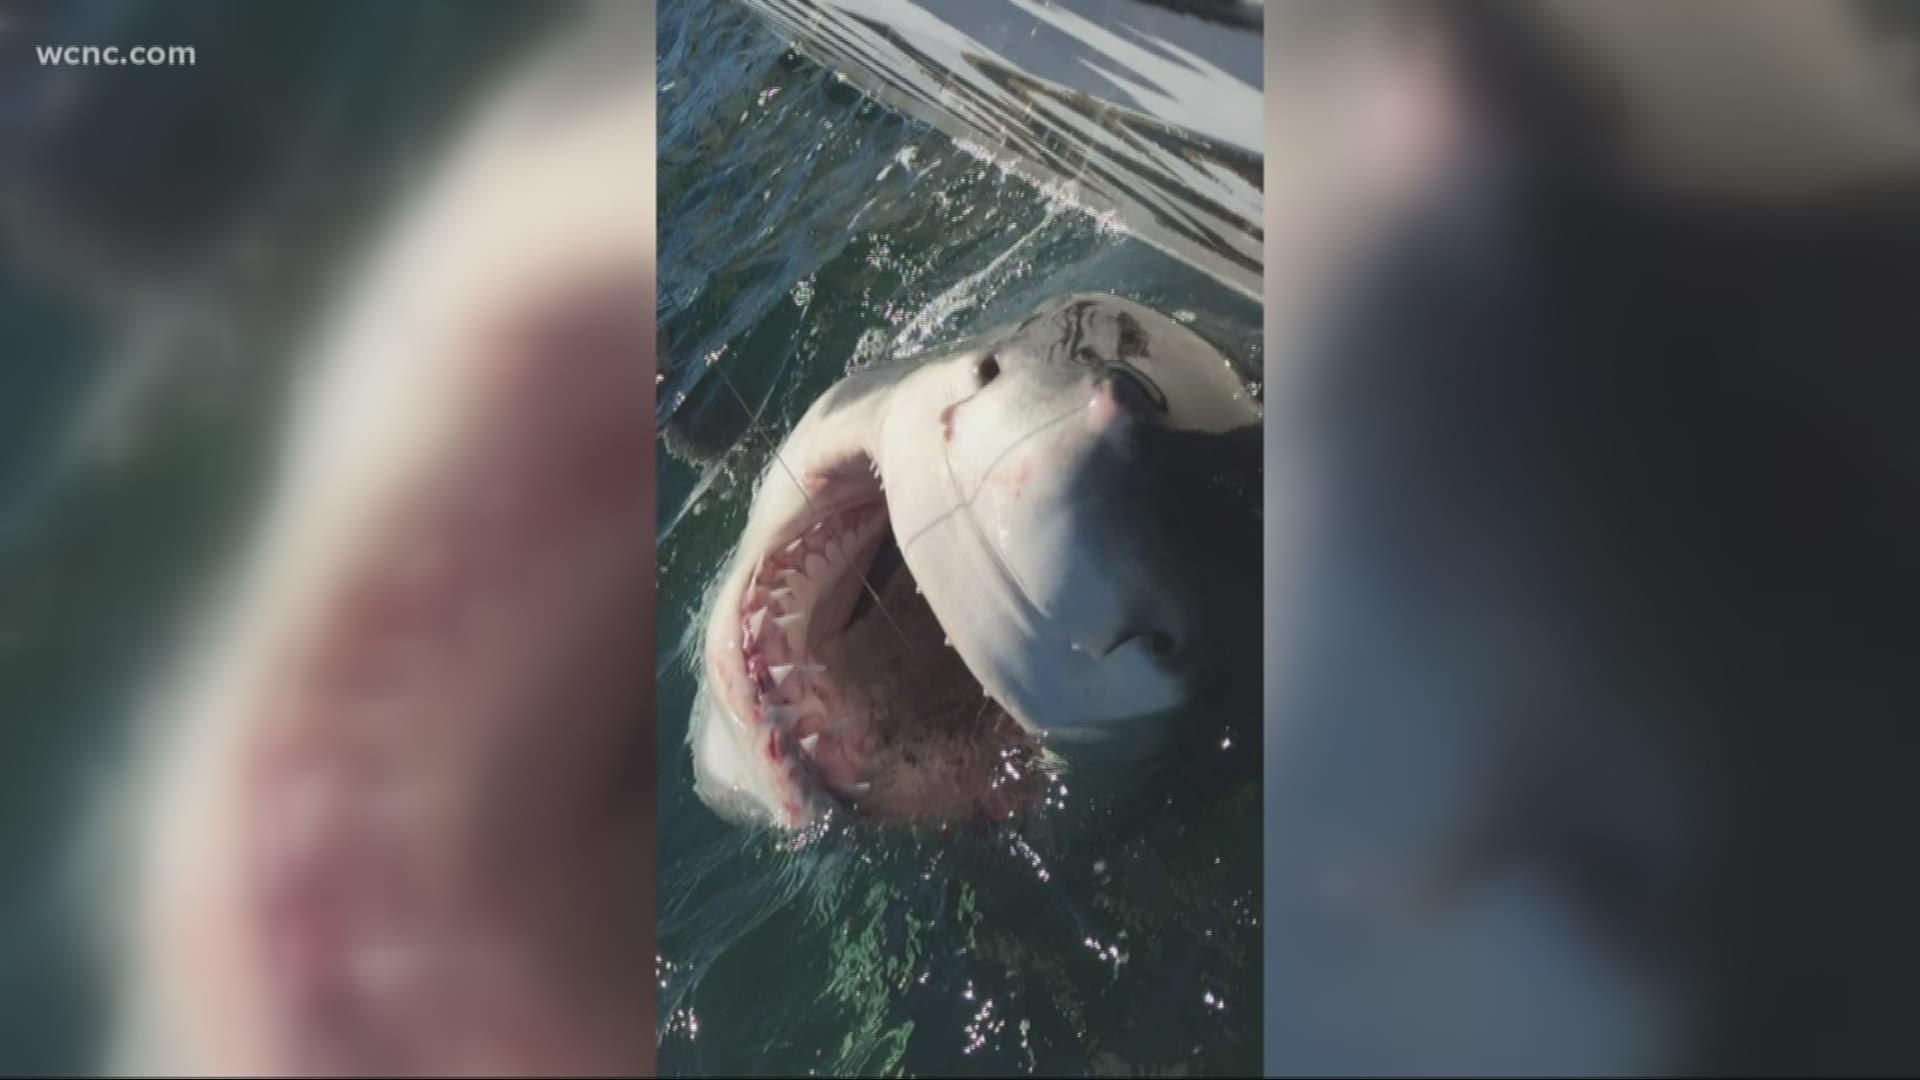 A fisherman off the Carolinas has named a shark after a hit-and-run victim whose killer remains free.